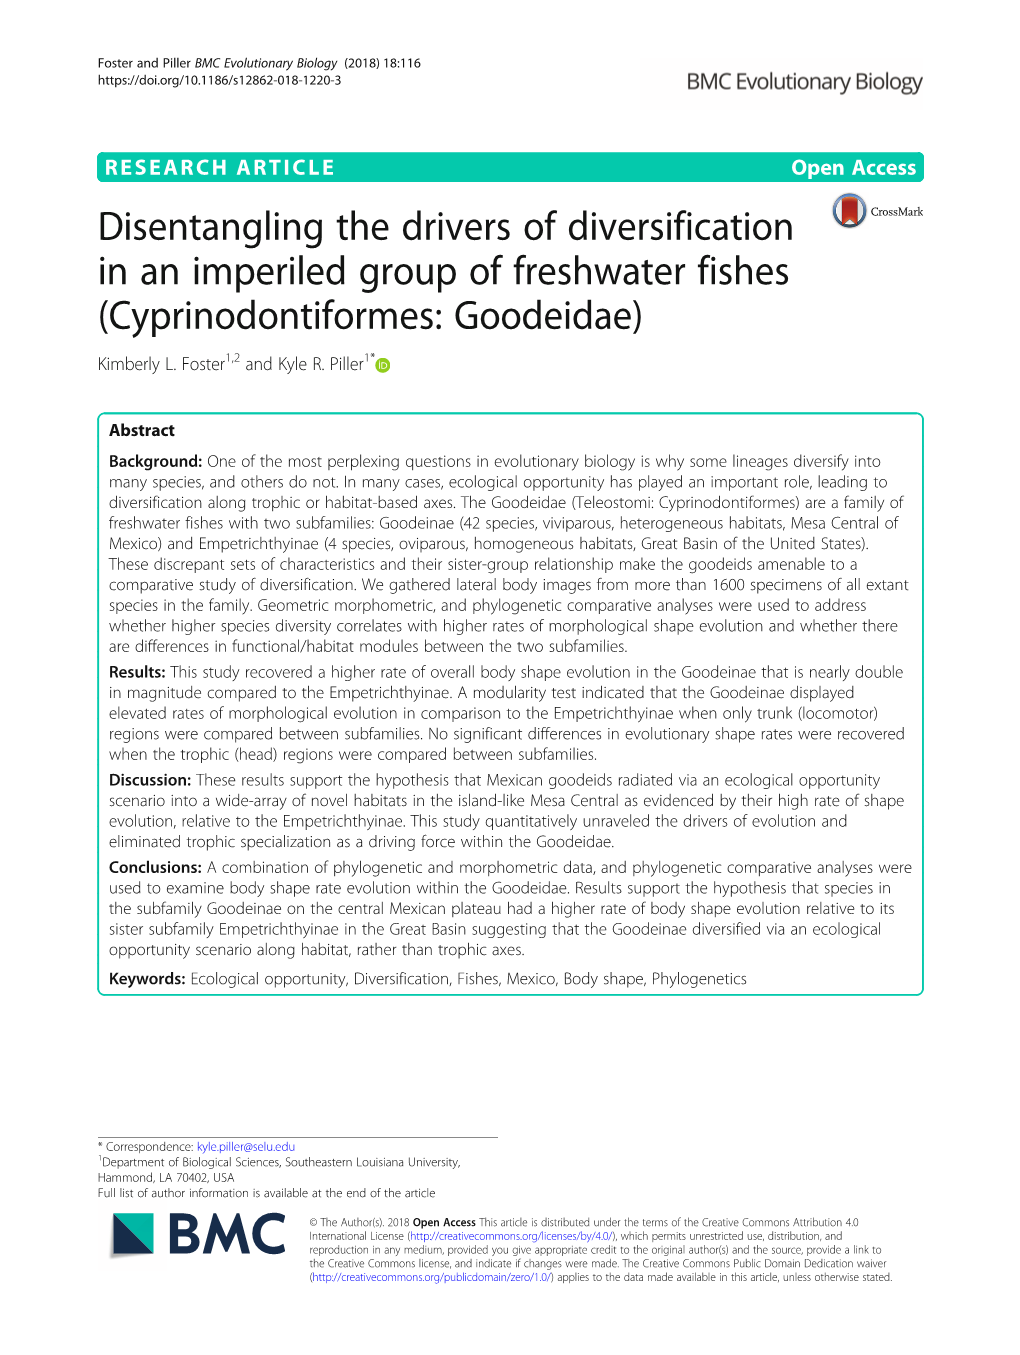 Disentangling the Drivers of Diversification in an Imperiled Group of Freshwater Fishes (Cyprinodontiformes: Goodeidae) Kimberly L